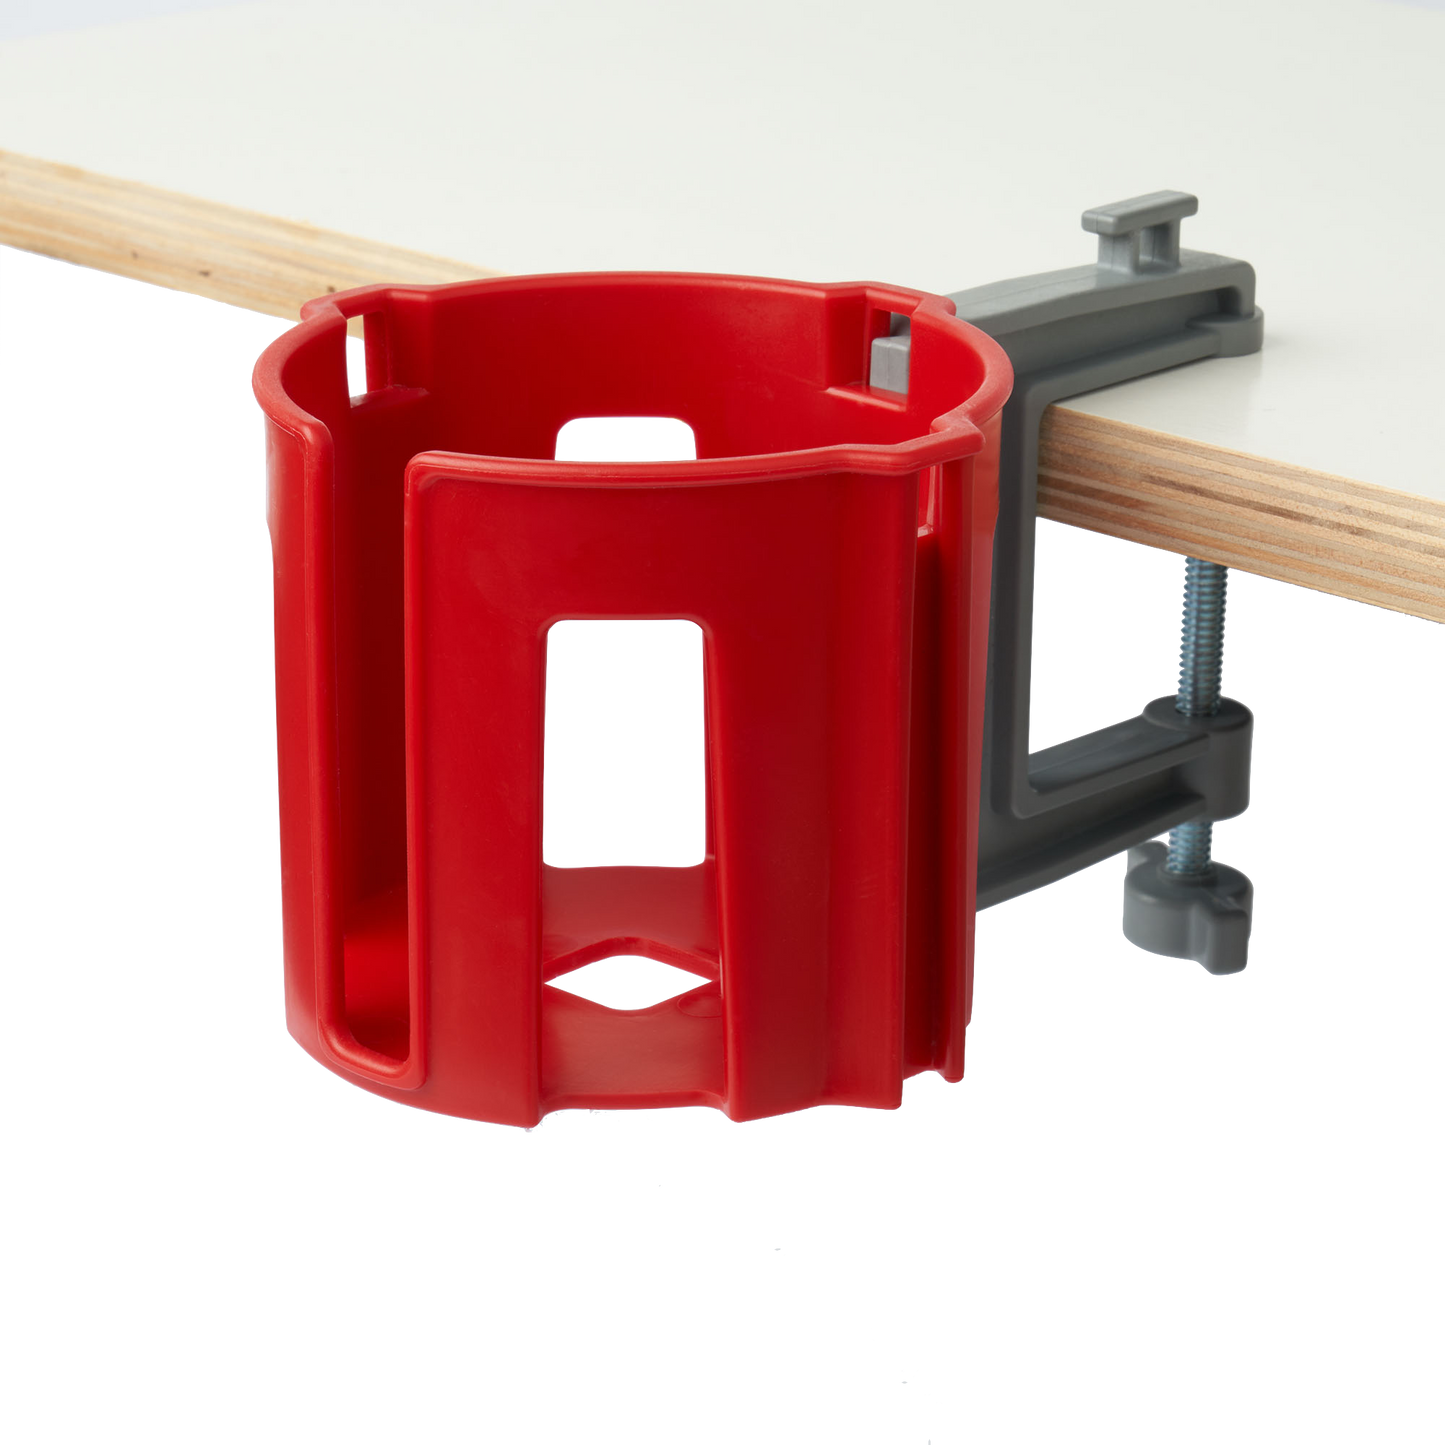 Cup-Holster - The Best Anti-Spill Cup Holder for Your Desk or Table